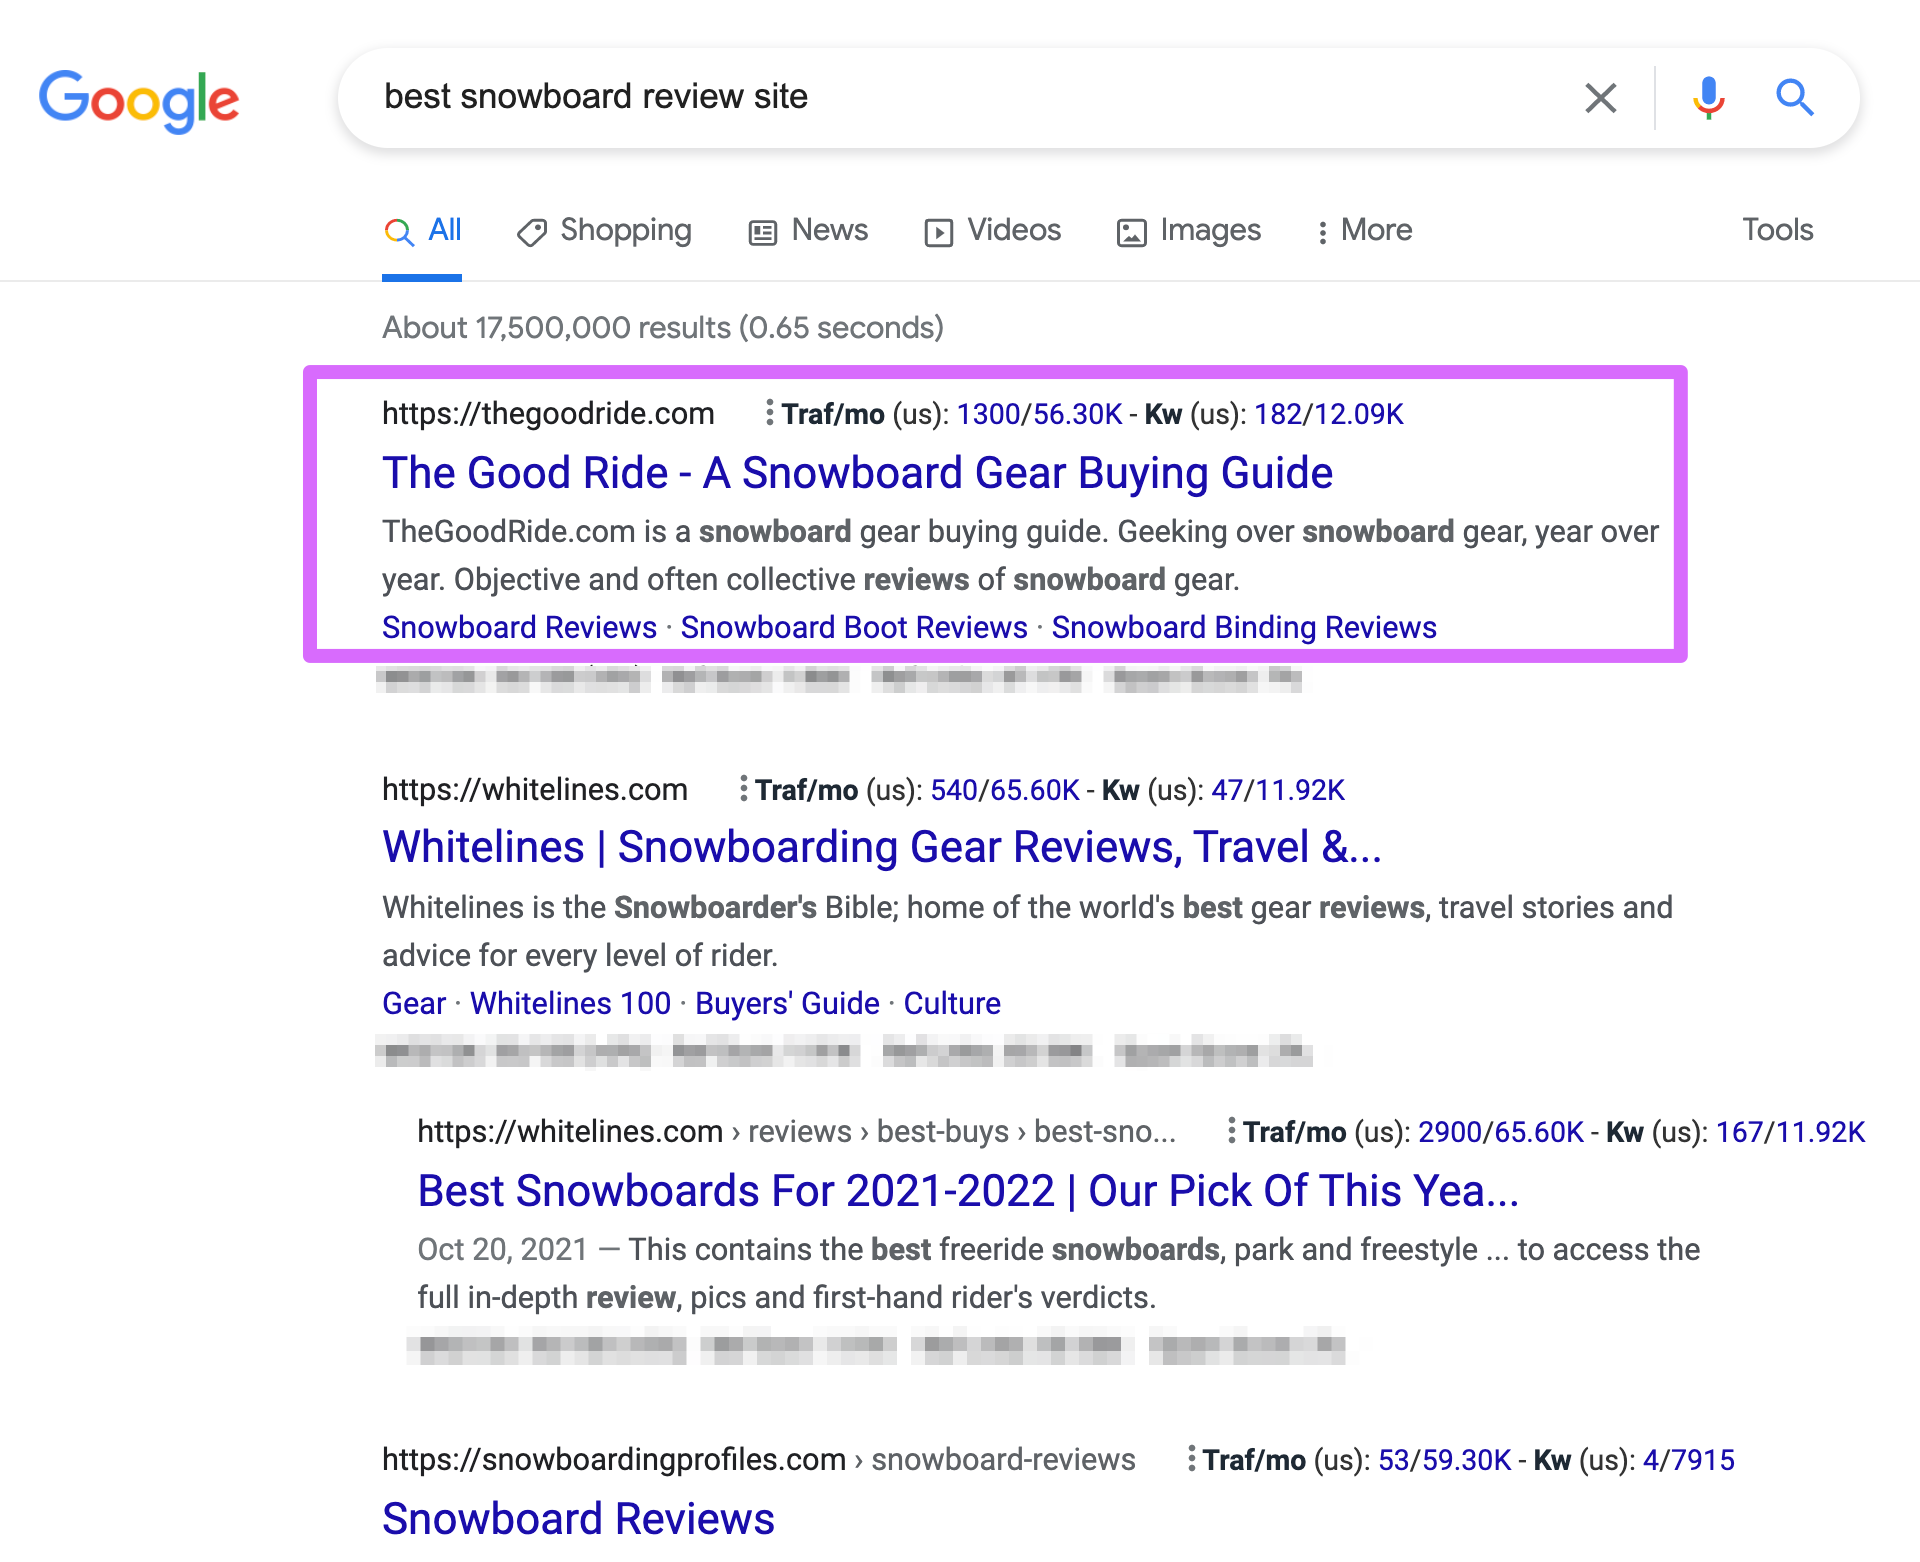 best snowboard review site search results on google